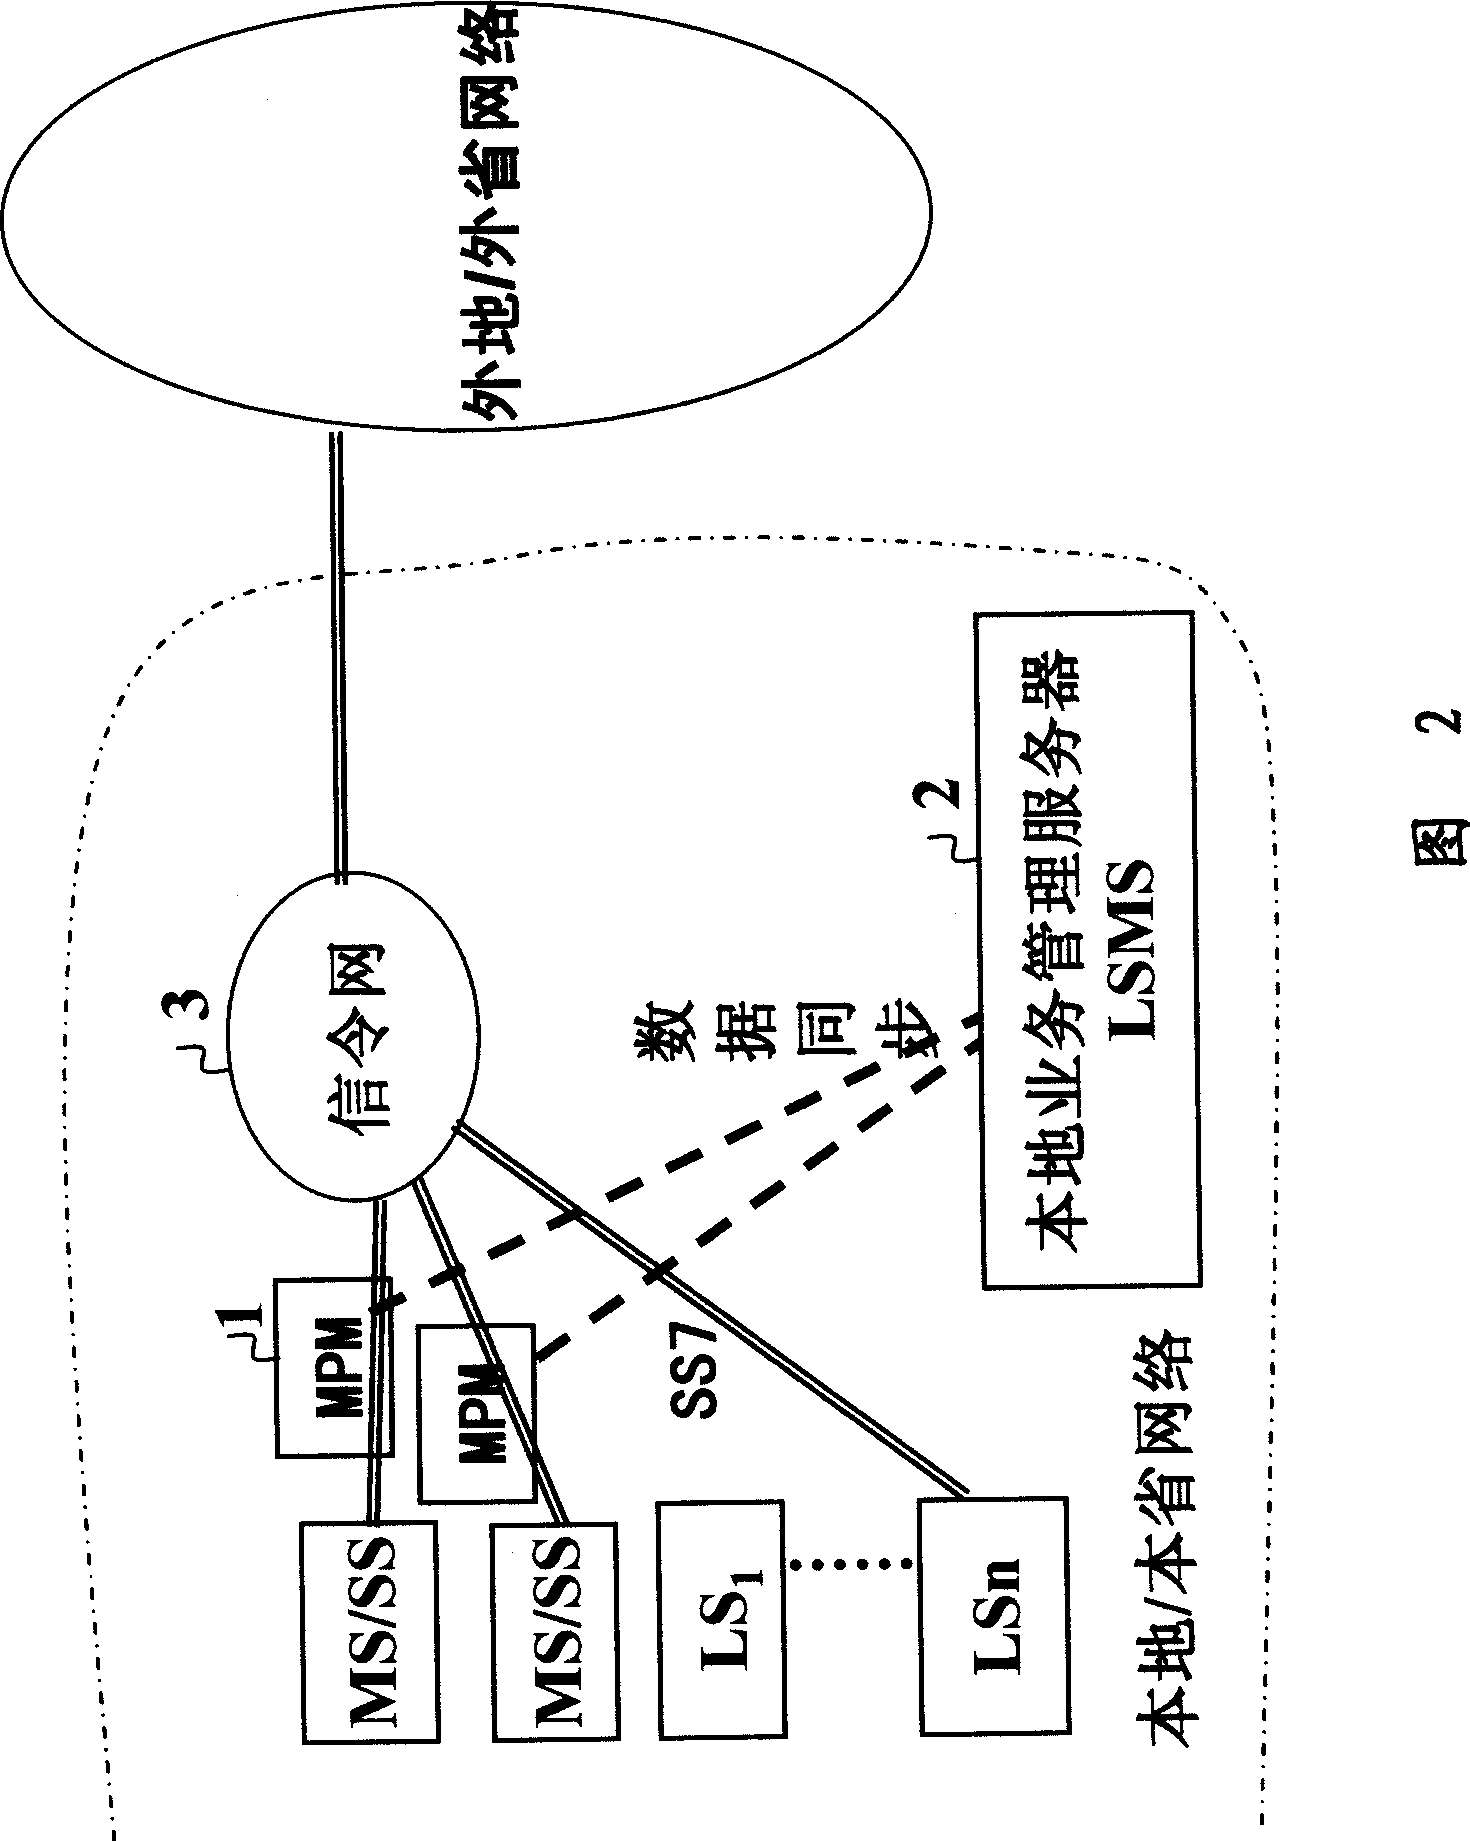 System and method for implementing call authentication gateway